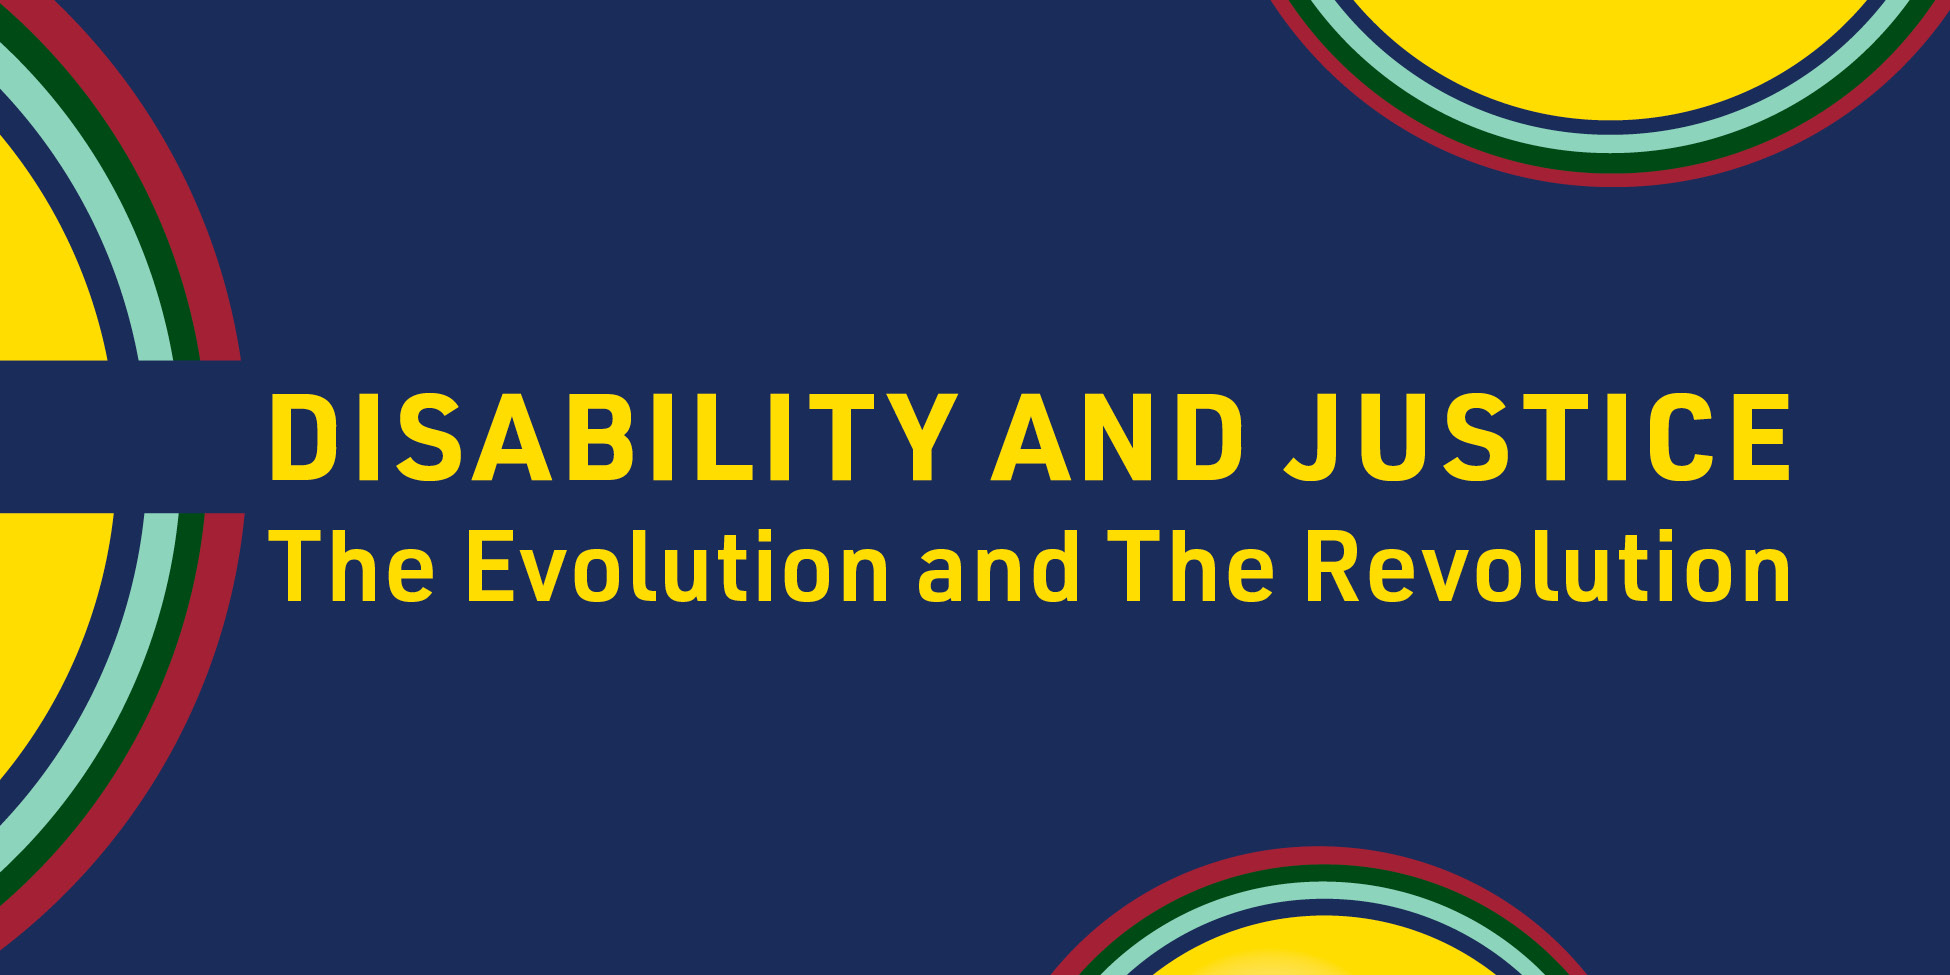 Event logo on dark blue background with text, Disability and Justice the Evolution and the Revolution, between edges of multicolored concentric circles